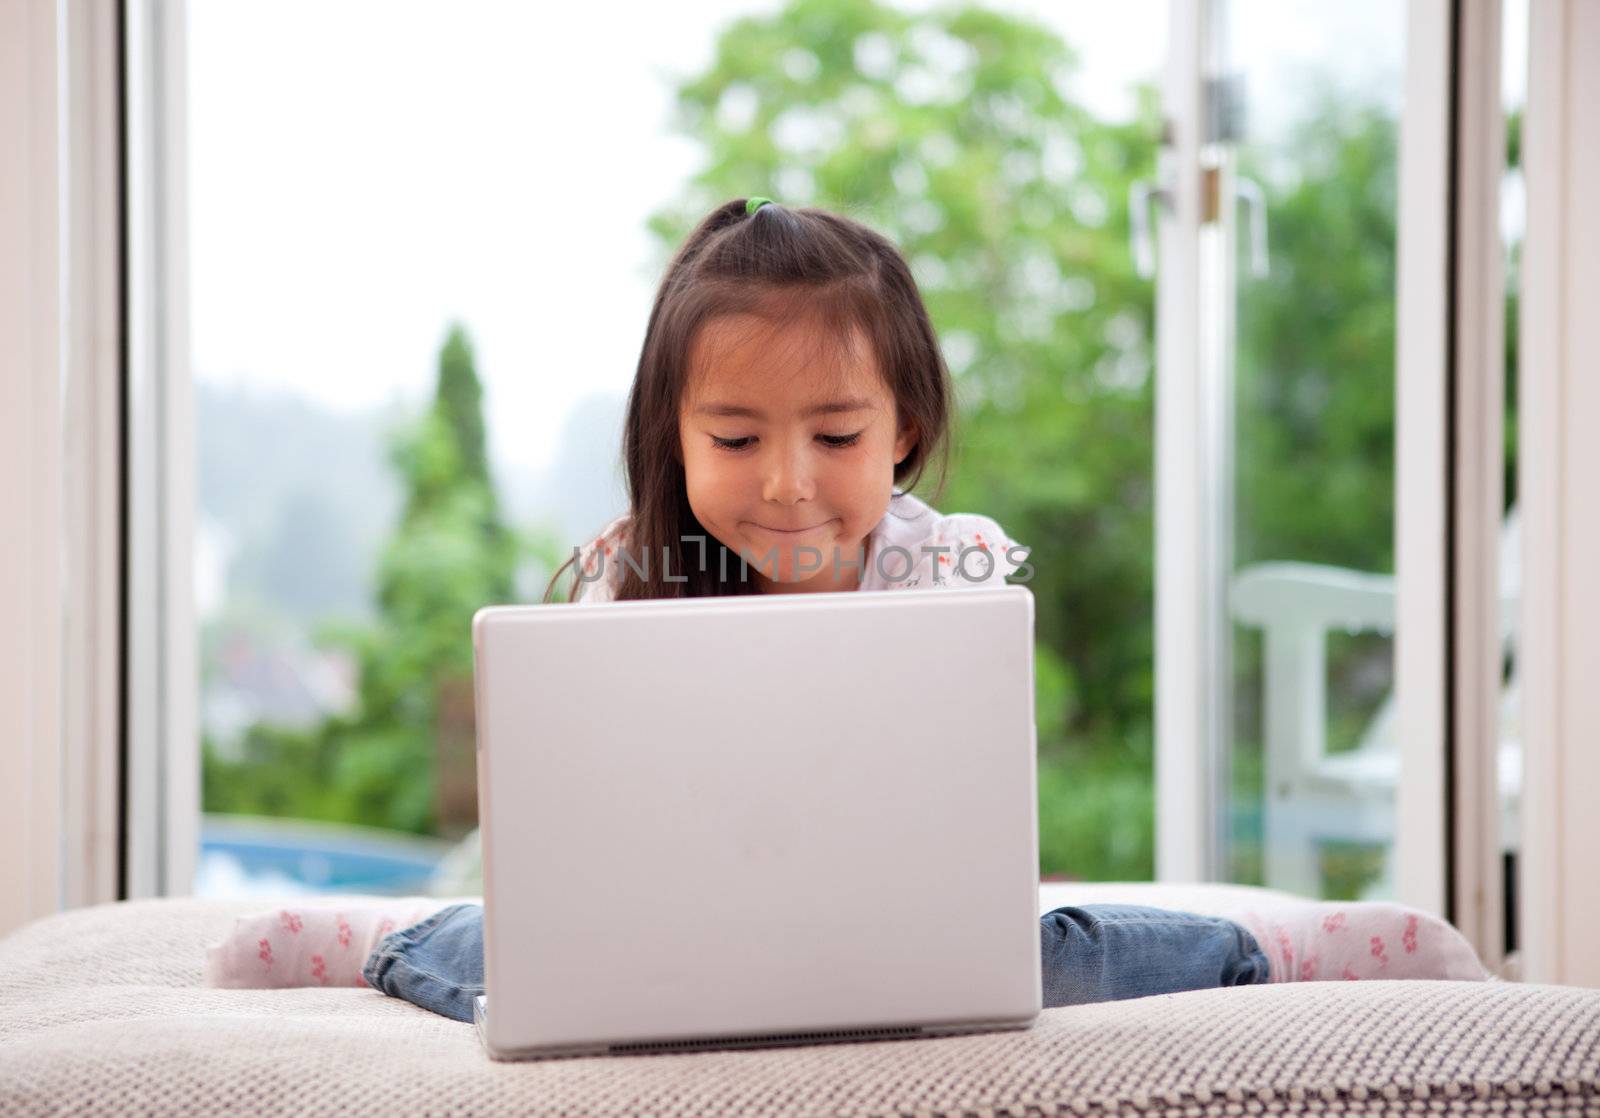 Young cute child using a computer in an indoor living room setting with large window